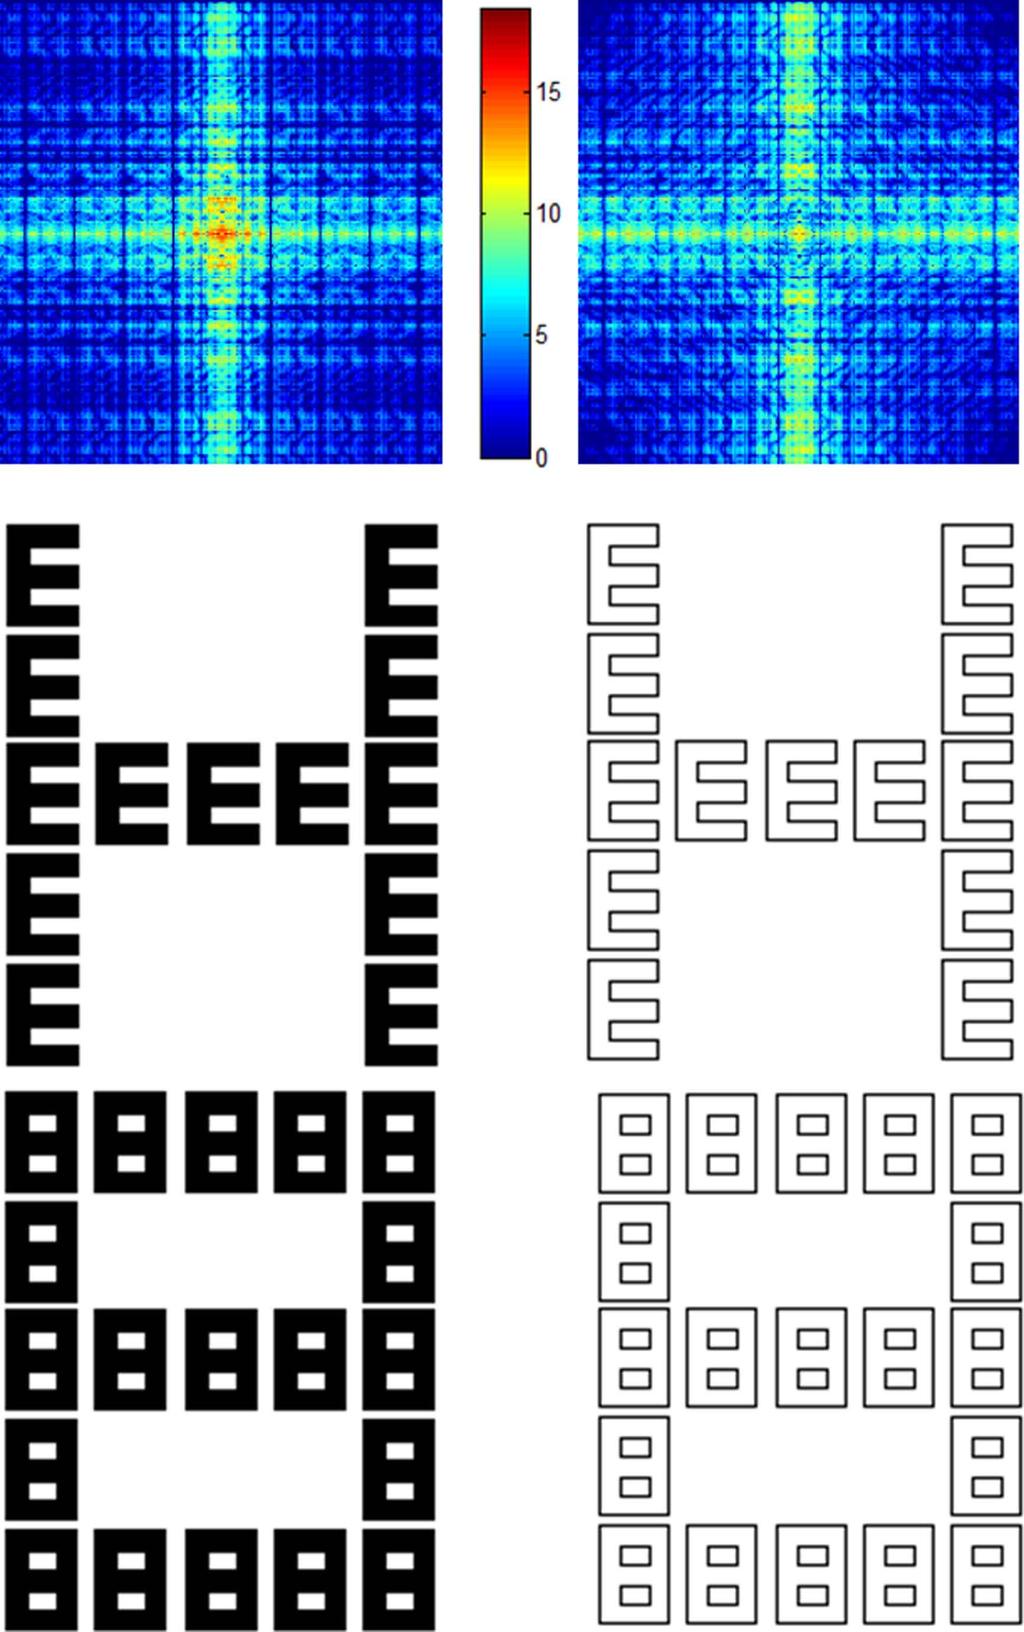 Figure 1 In the middle row examples of filled (on the left) and outlined (on the right) hierarchical letters are shown. The corresponding masks can be seen below the stimuli.